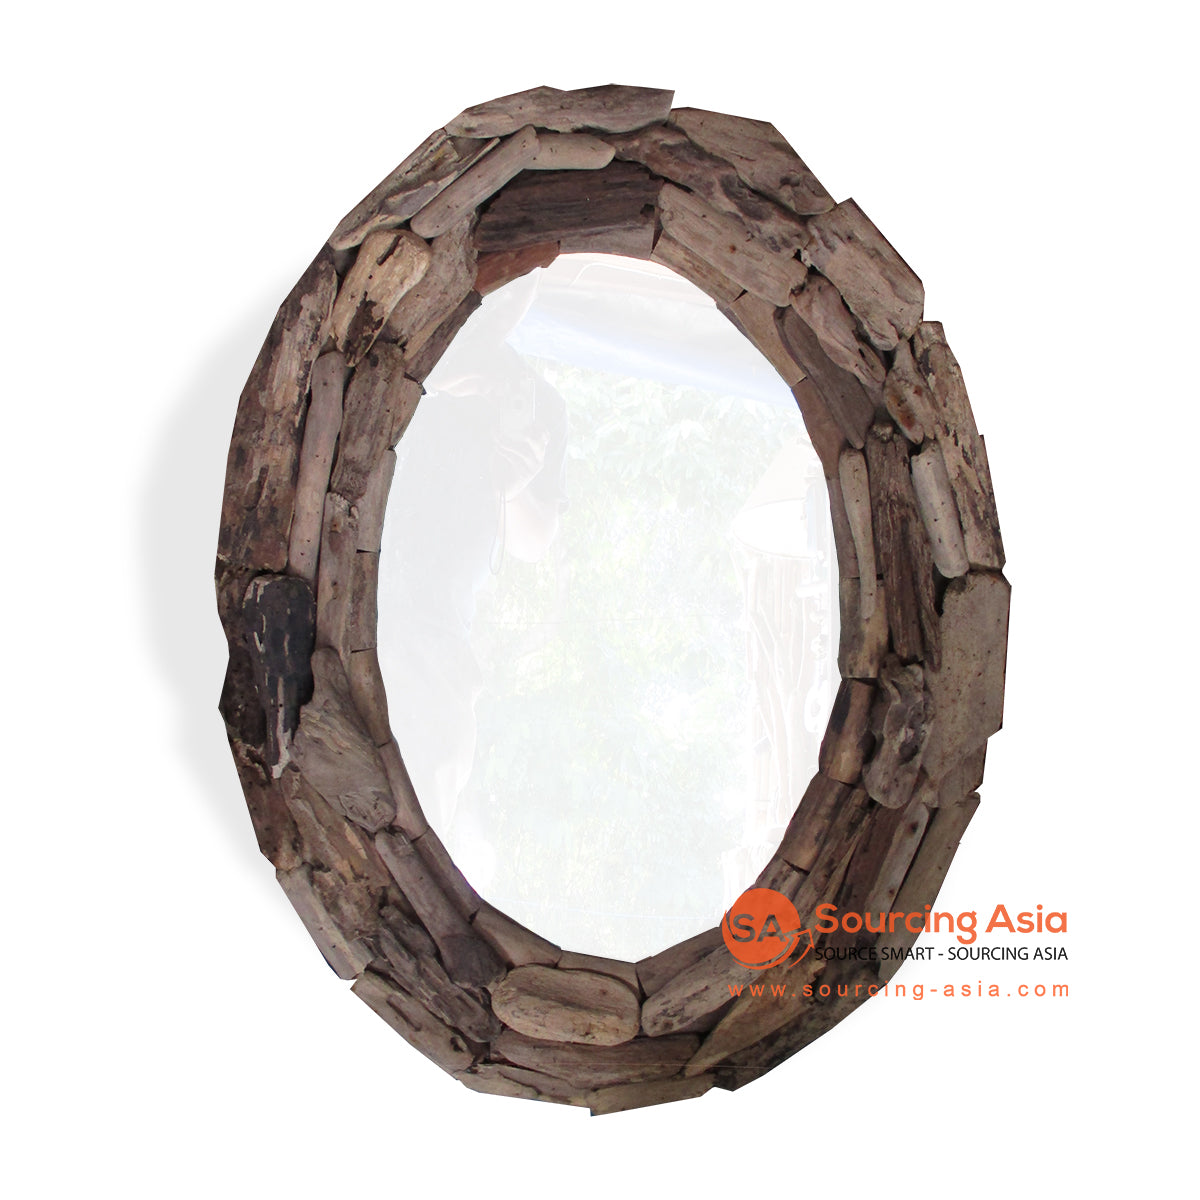 PJY022 NATURAL DRIFTWOOD OVAL MIRROR DECORATION